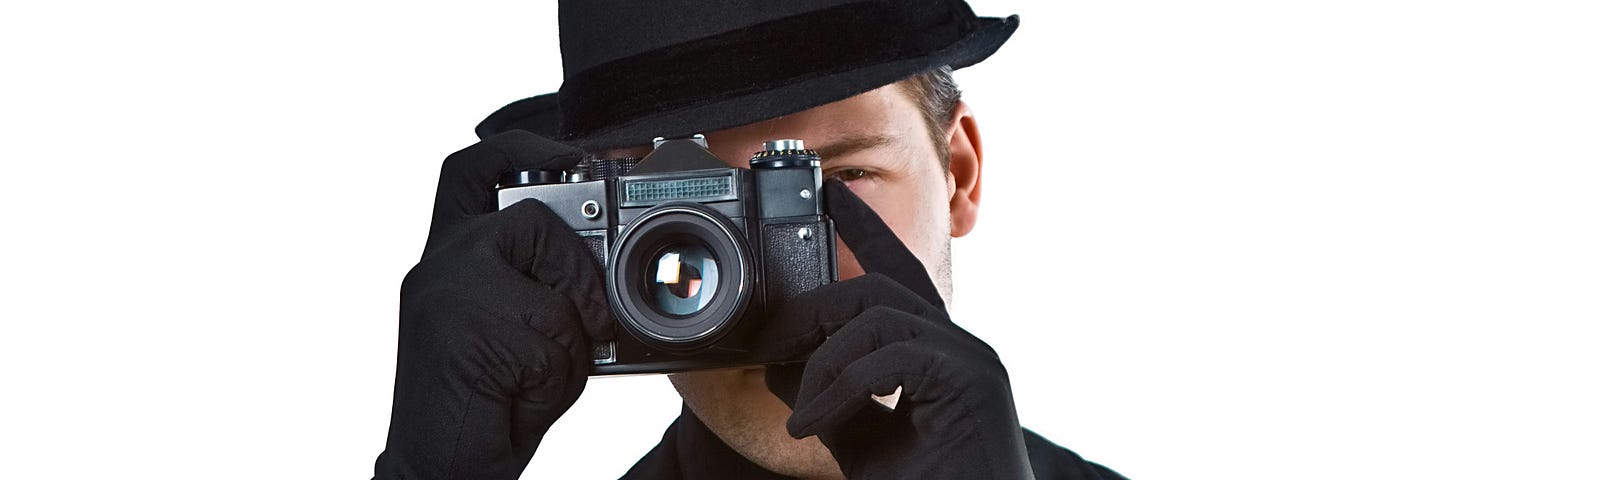 Man in suit, hat and gloves holding a camera in front of his face to take a picture.